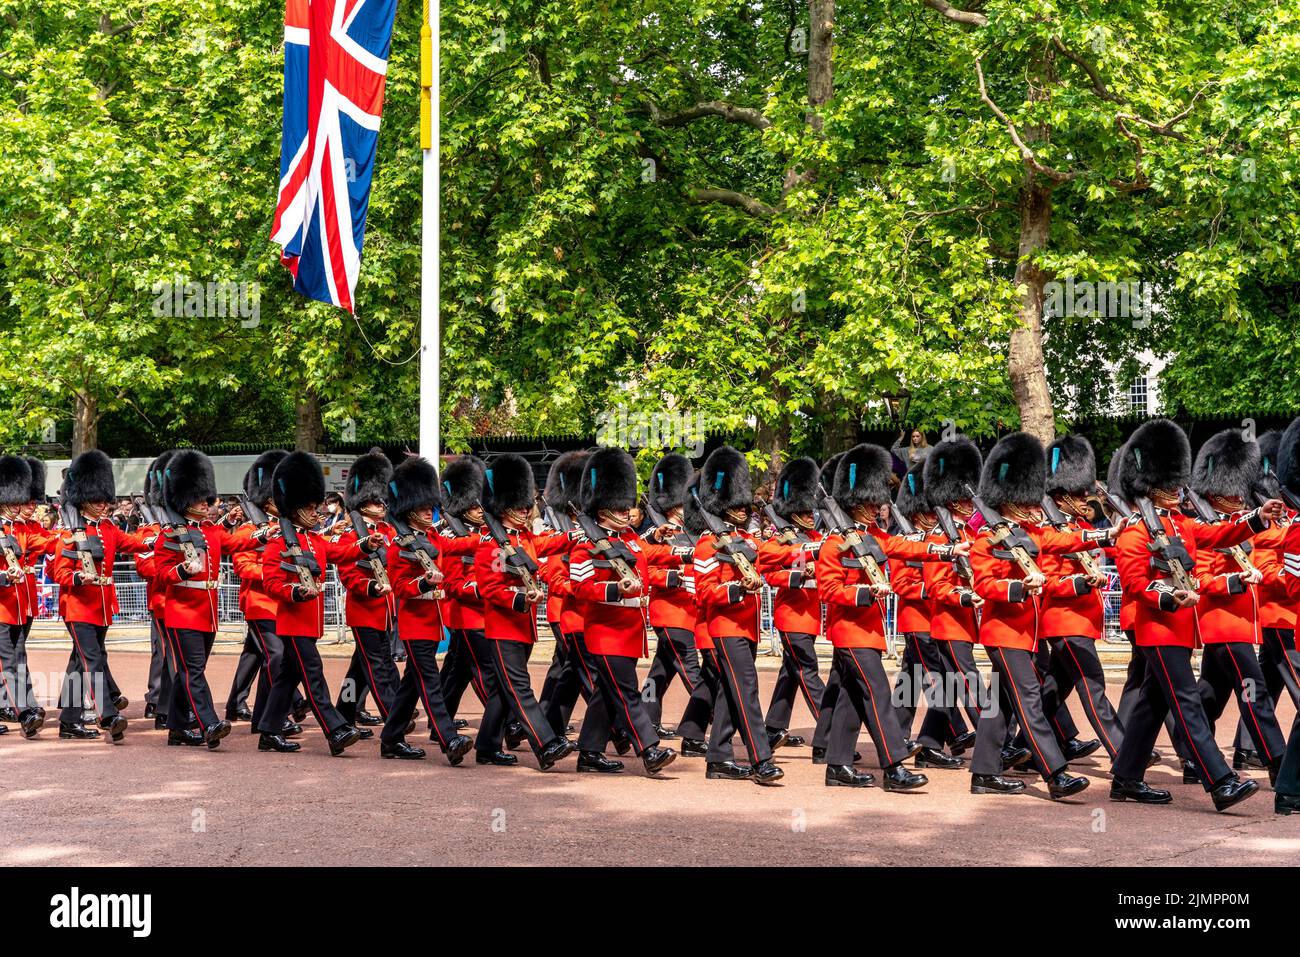 The Irish Guards Take Part In The Queen's Birthday Parade By Marching Along The Mall For The Trooping Of The Colour Ceremony, London, UK. Stock Photo